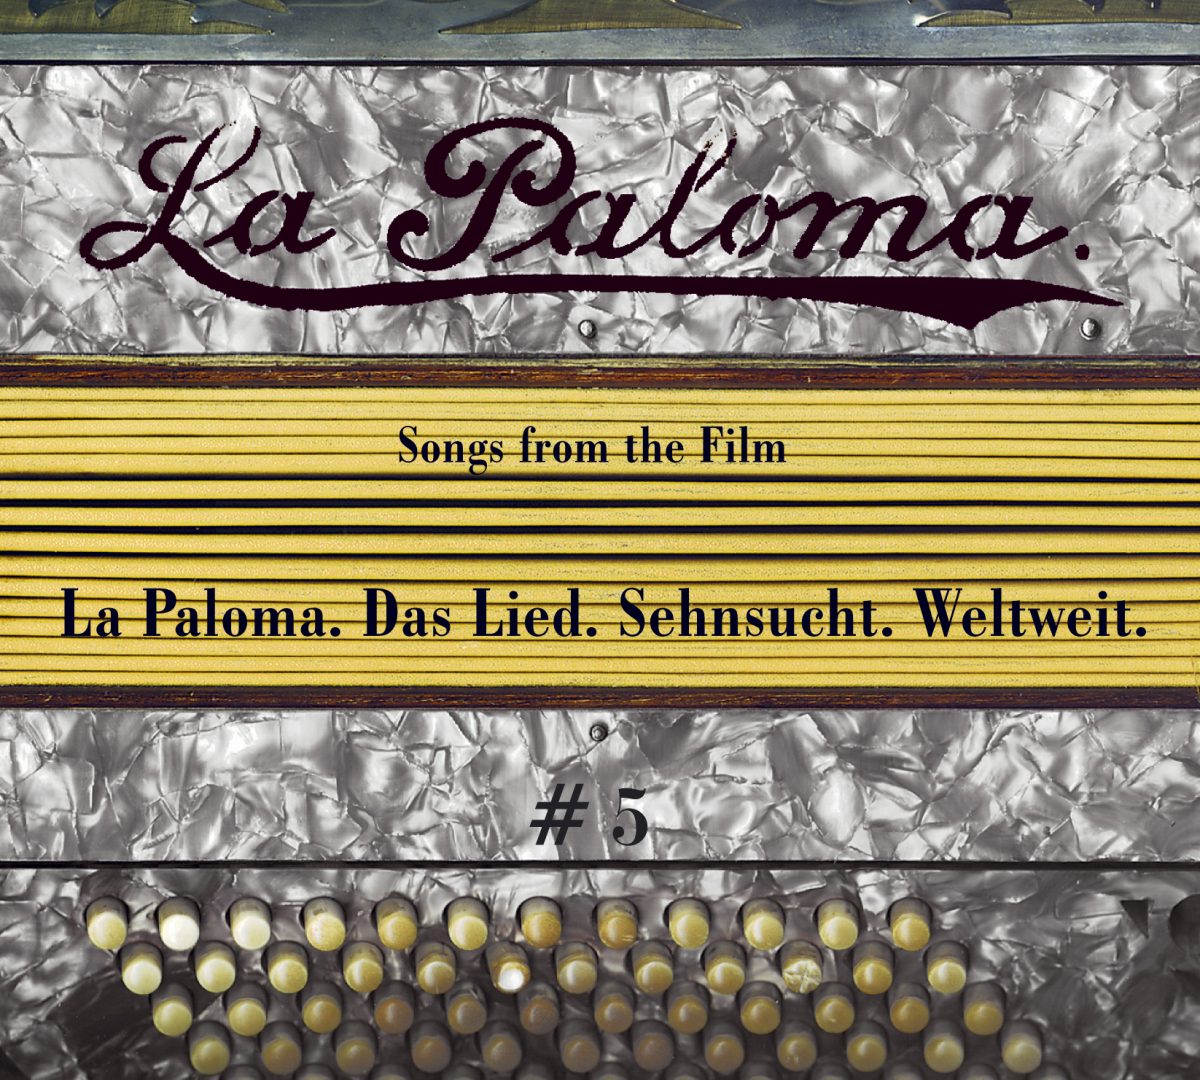 La Paloma - One Song for all Worlds - Vol. V "Songs From The Film"